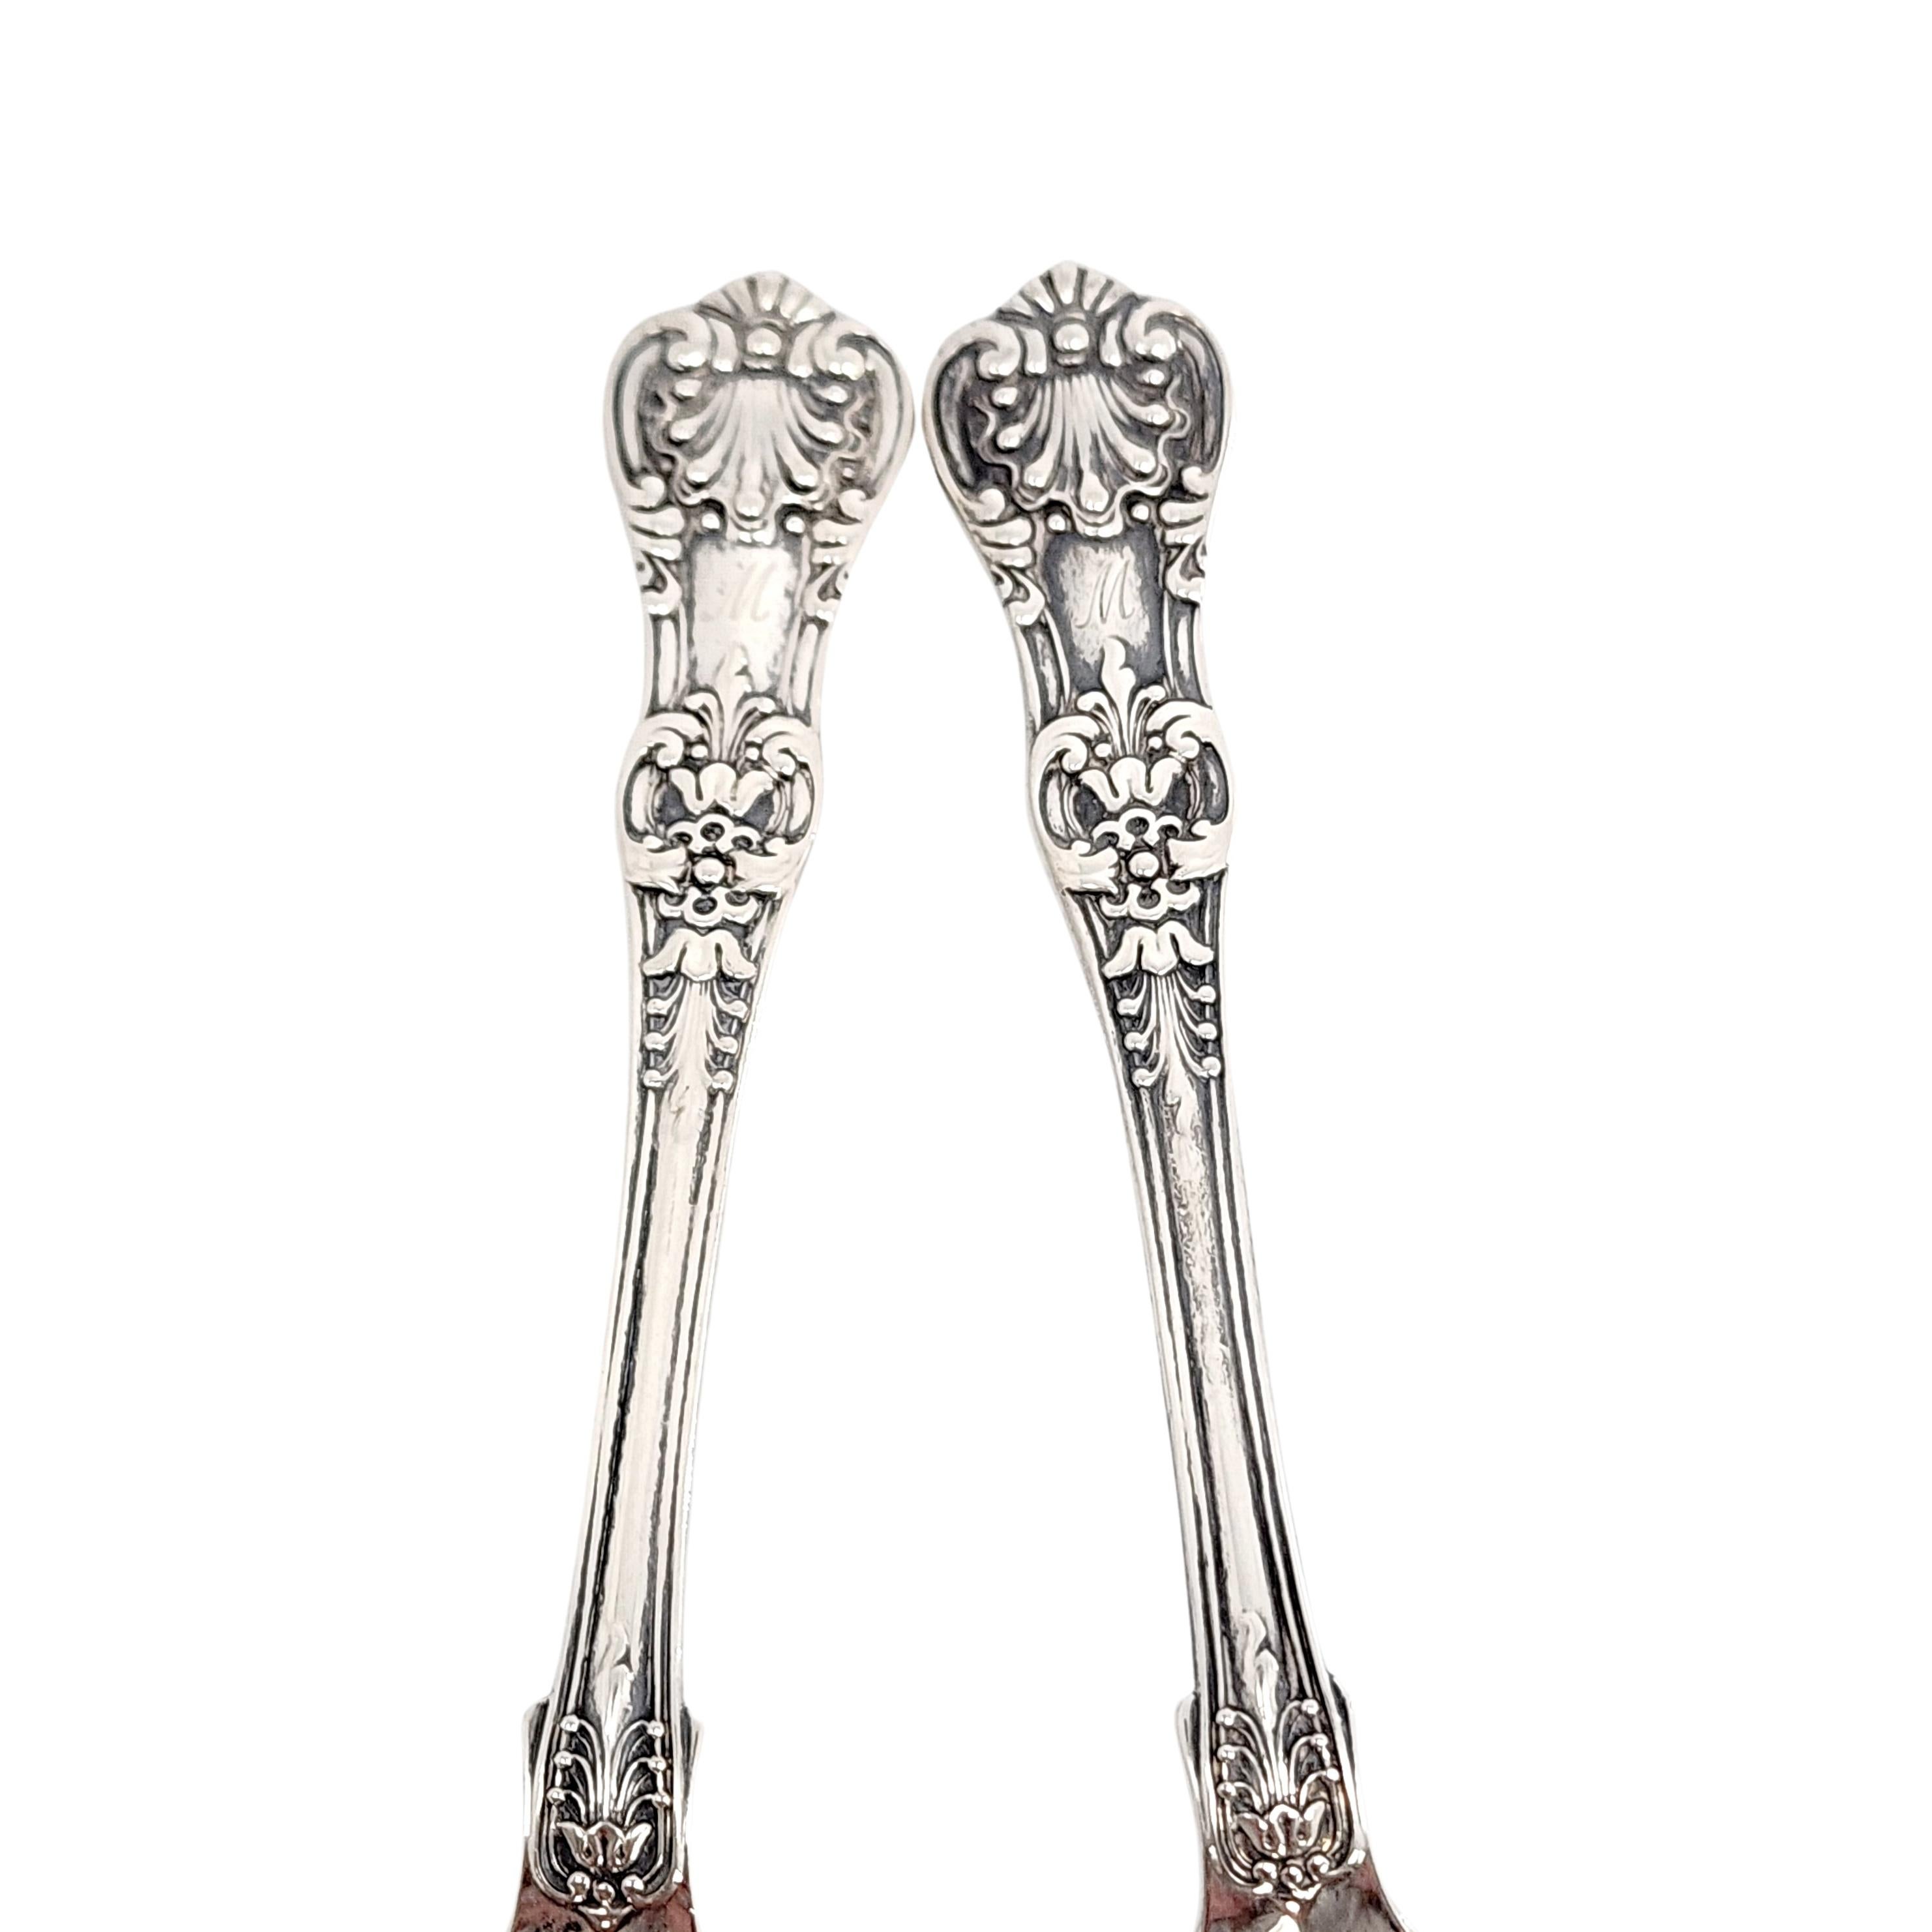 Set of 2 Tiffany & Co Sterling Silver English King Demitasse Spoons 5